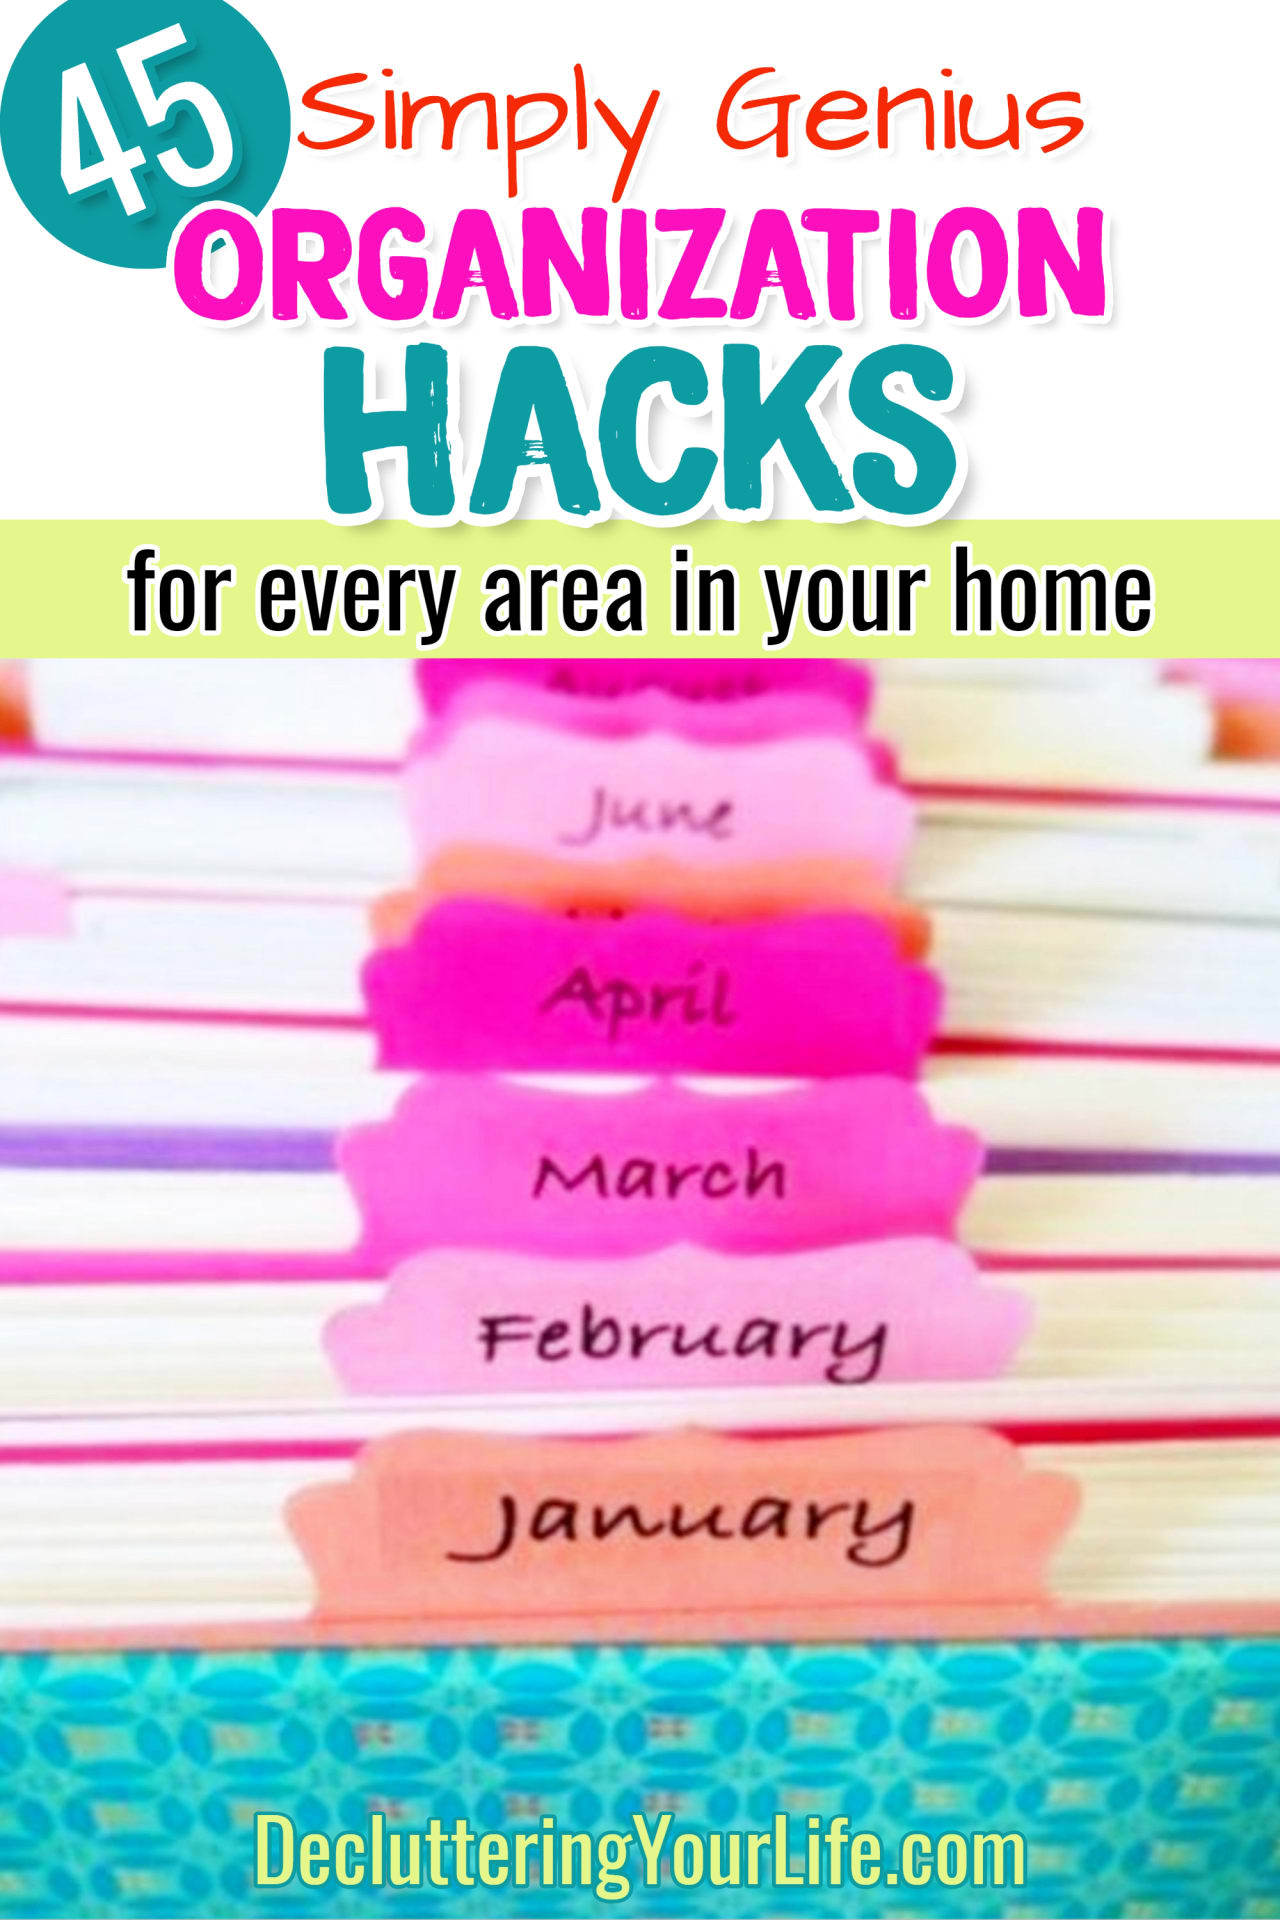 45 GENIUS Organizing Ideas and Home Organization Hacks to Declutter Your Life for GOOD!  These decluttering and organizing ideas are super easy DIY organization hacks that make getting organized and STAYING organized less of an overwhelming experience.  If clutter and too much stuff is making your house messy, put these useful life hacks in your household notebook to get organized.